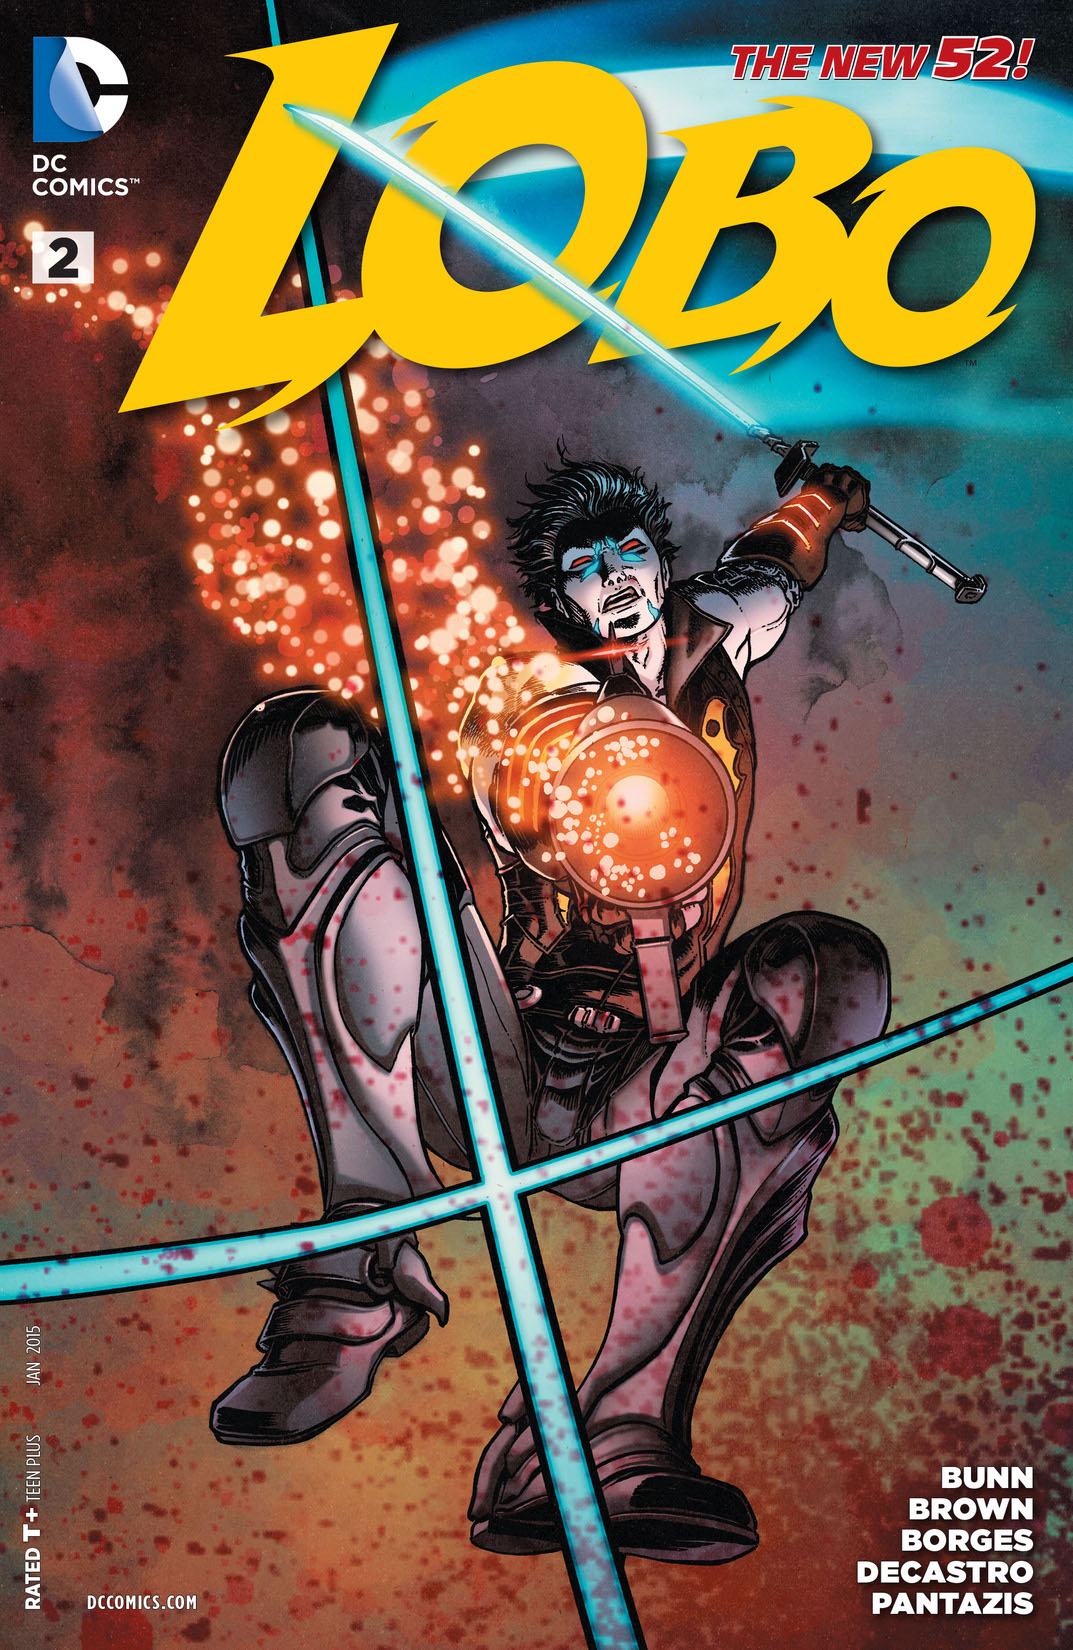 Lobo (2014-) #2 preview images